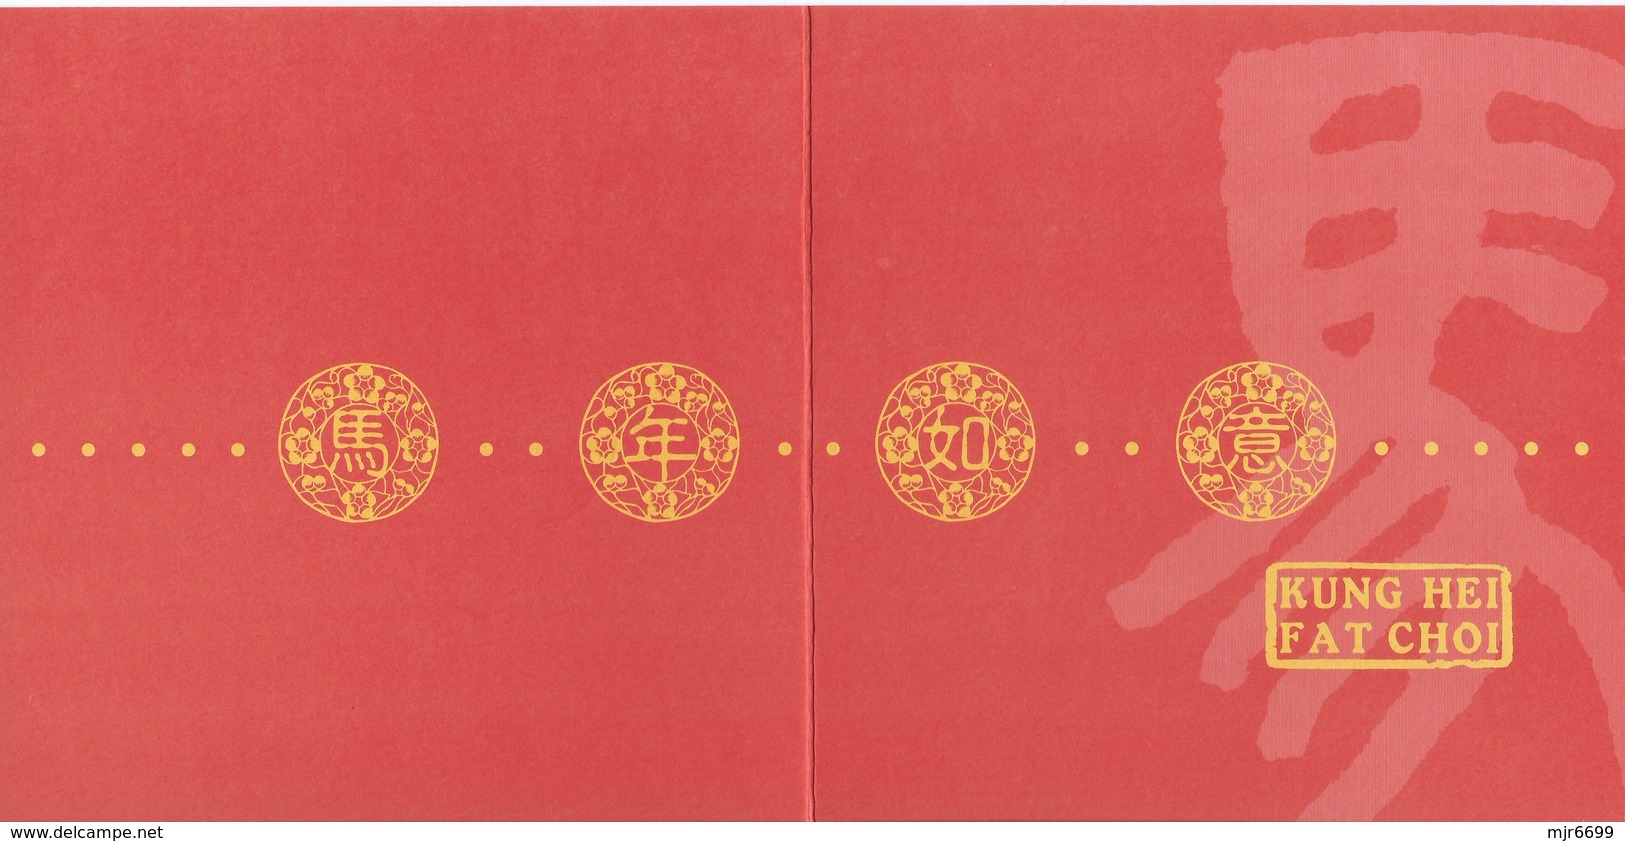 MACAU 2002 LUNAR NEW YEAR OF THE HORSE GREETING CARD & POSTAGE PAID COVER, LOCAL USAGE,  POST OFFICE CODE #BPD003 - Postal Stationery